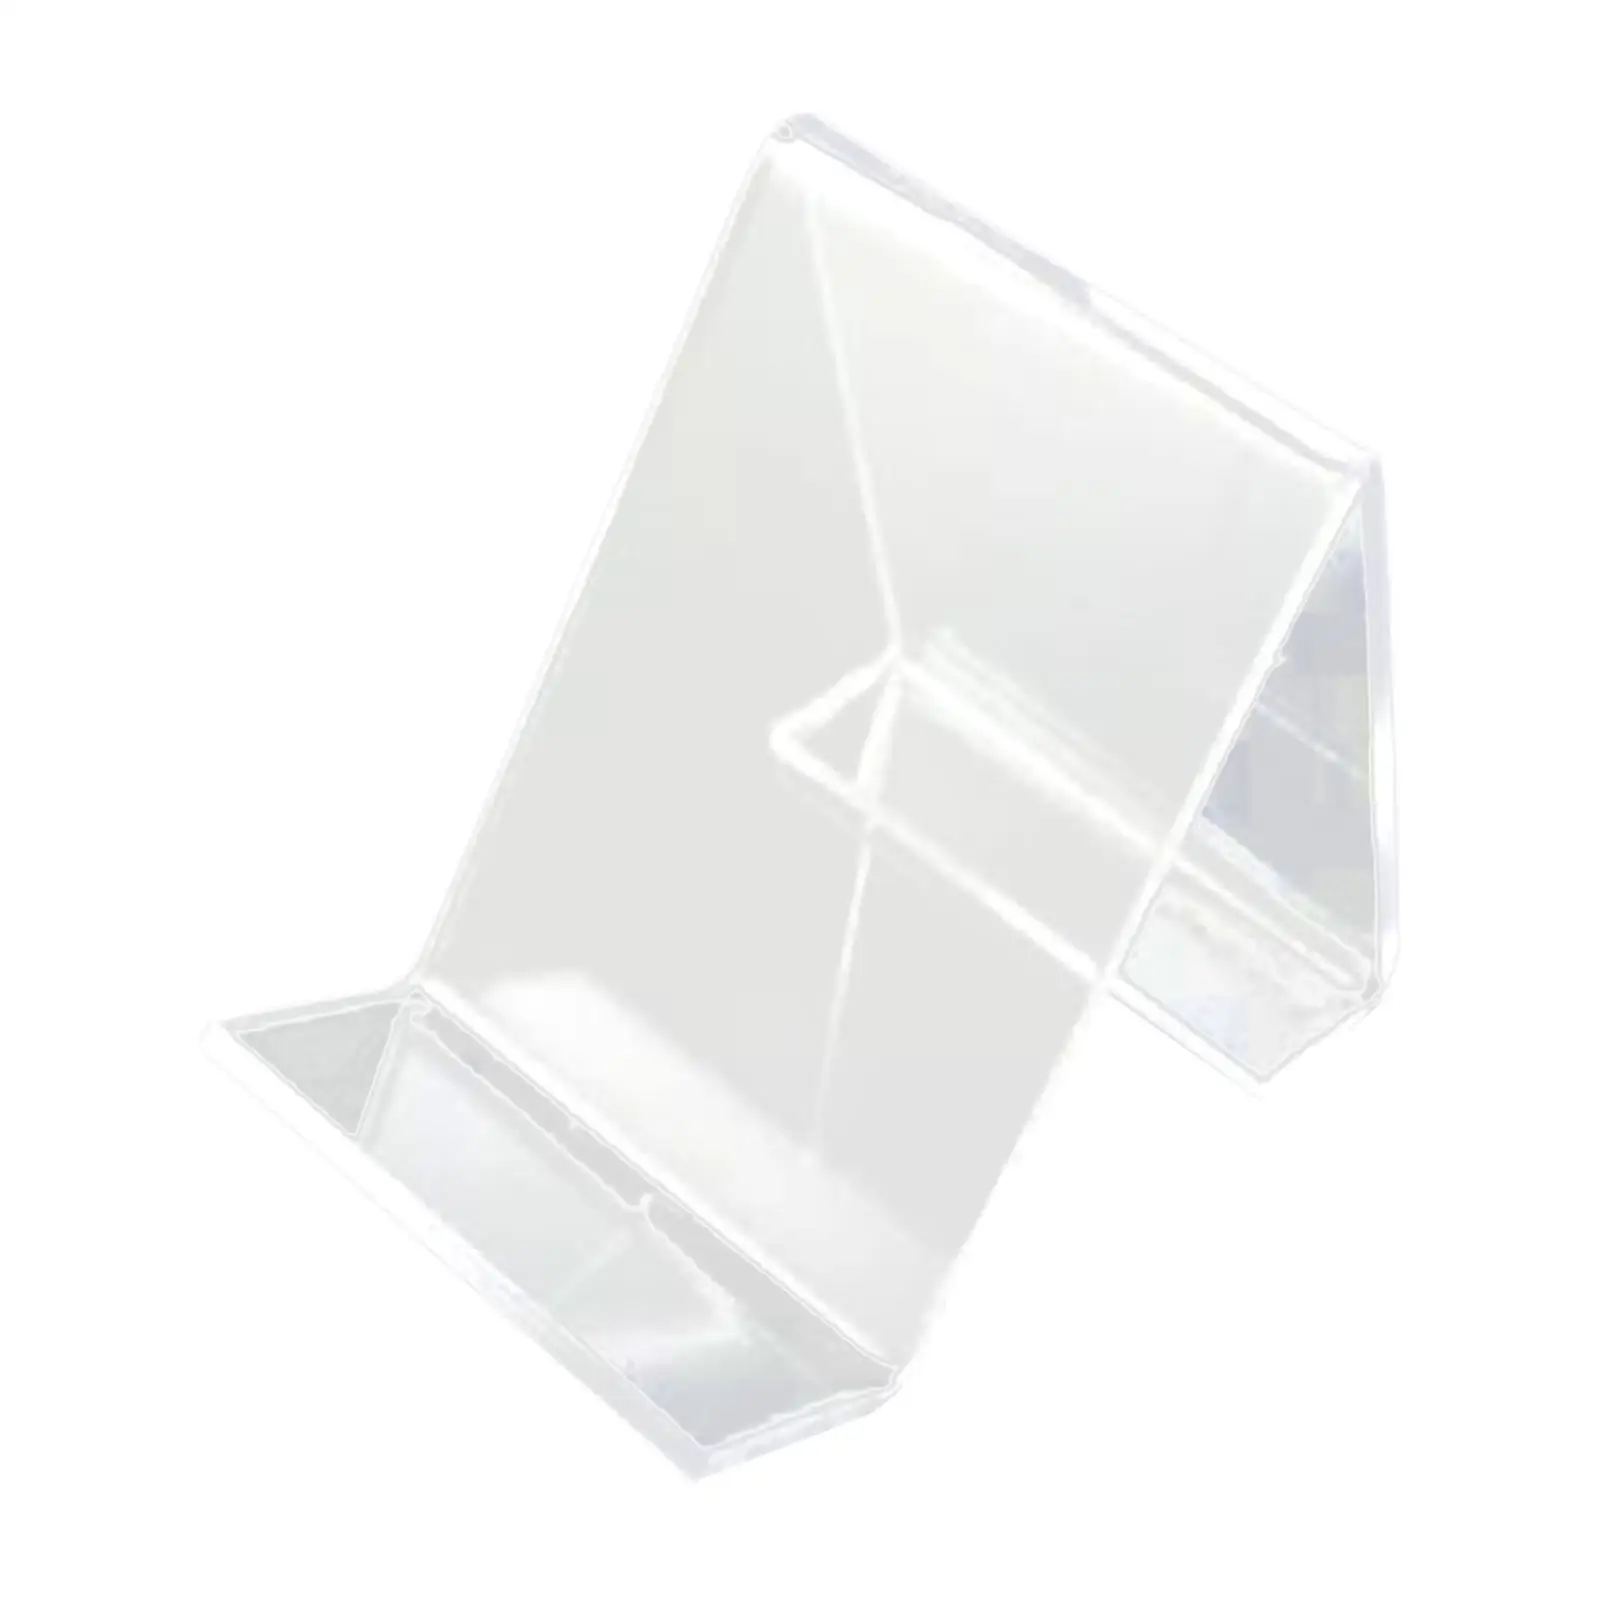 Desktop Mobile Phone Acrylic Stand Clear Holder Easy to Use Daily Use Displaying Collections